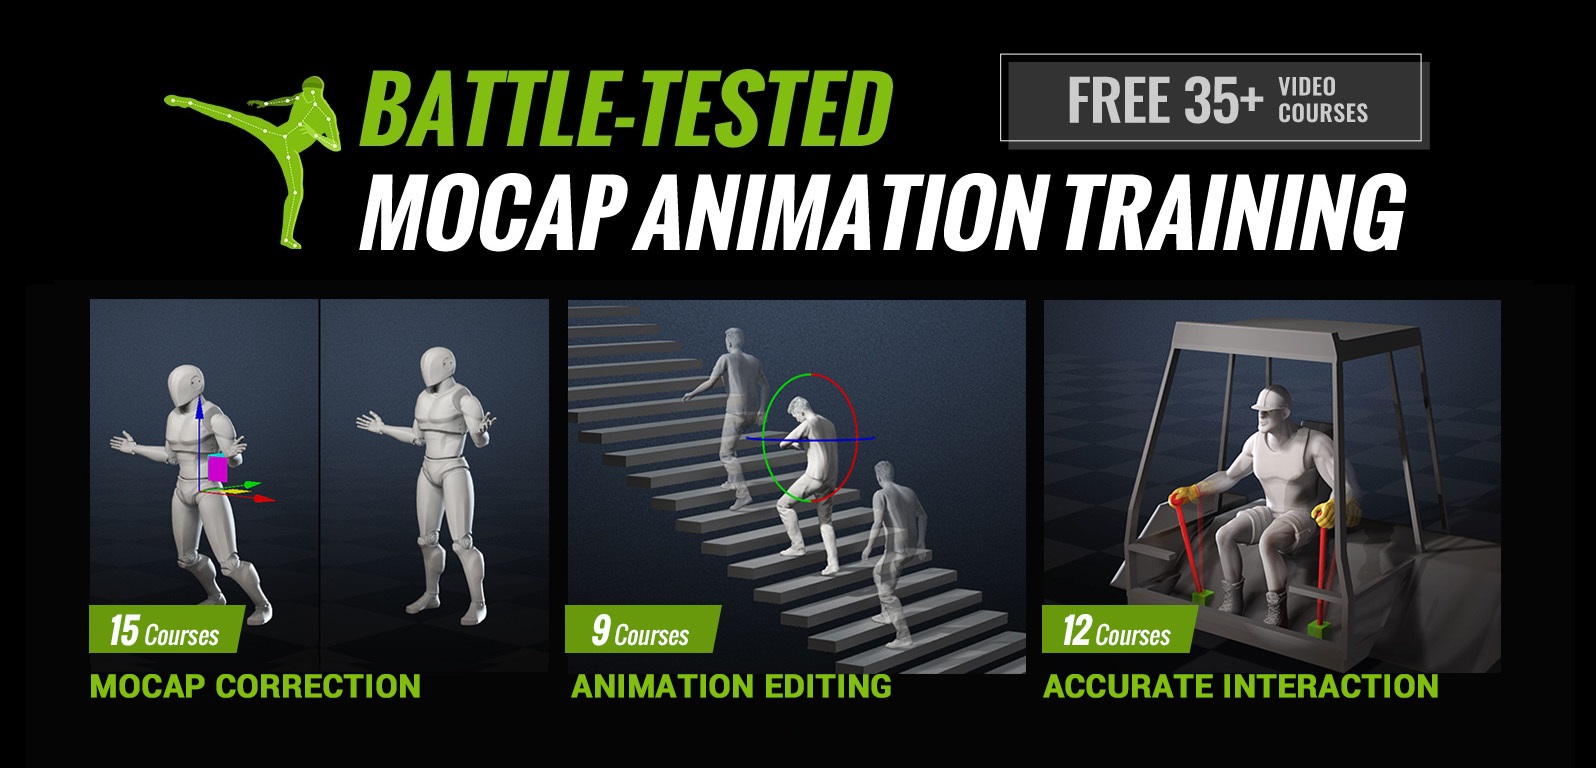 Reallusion offers 35 mocap animation training courses that cover every aspect of mocap production